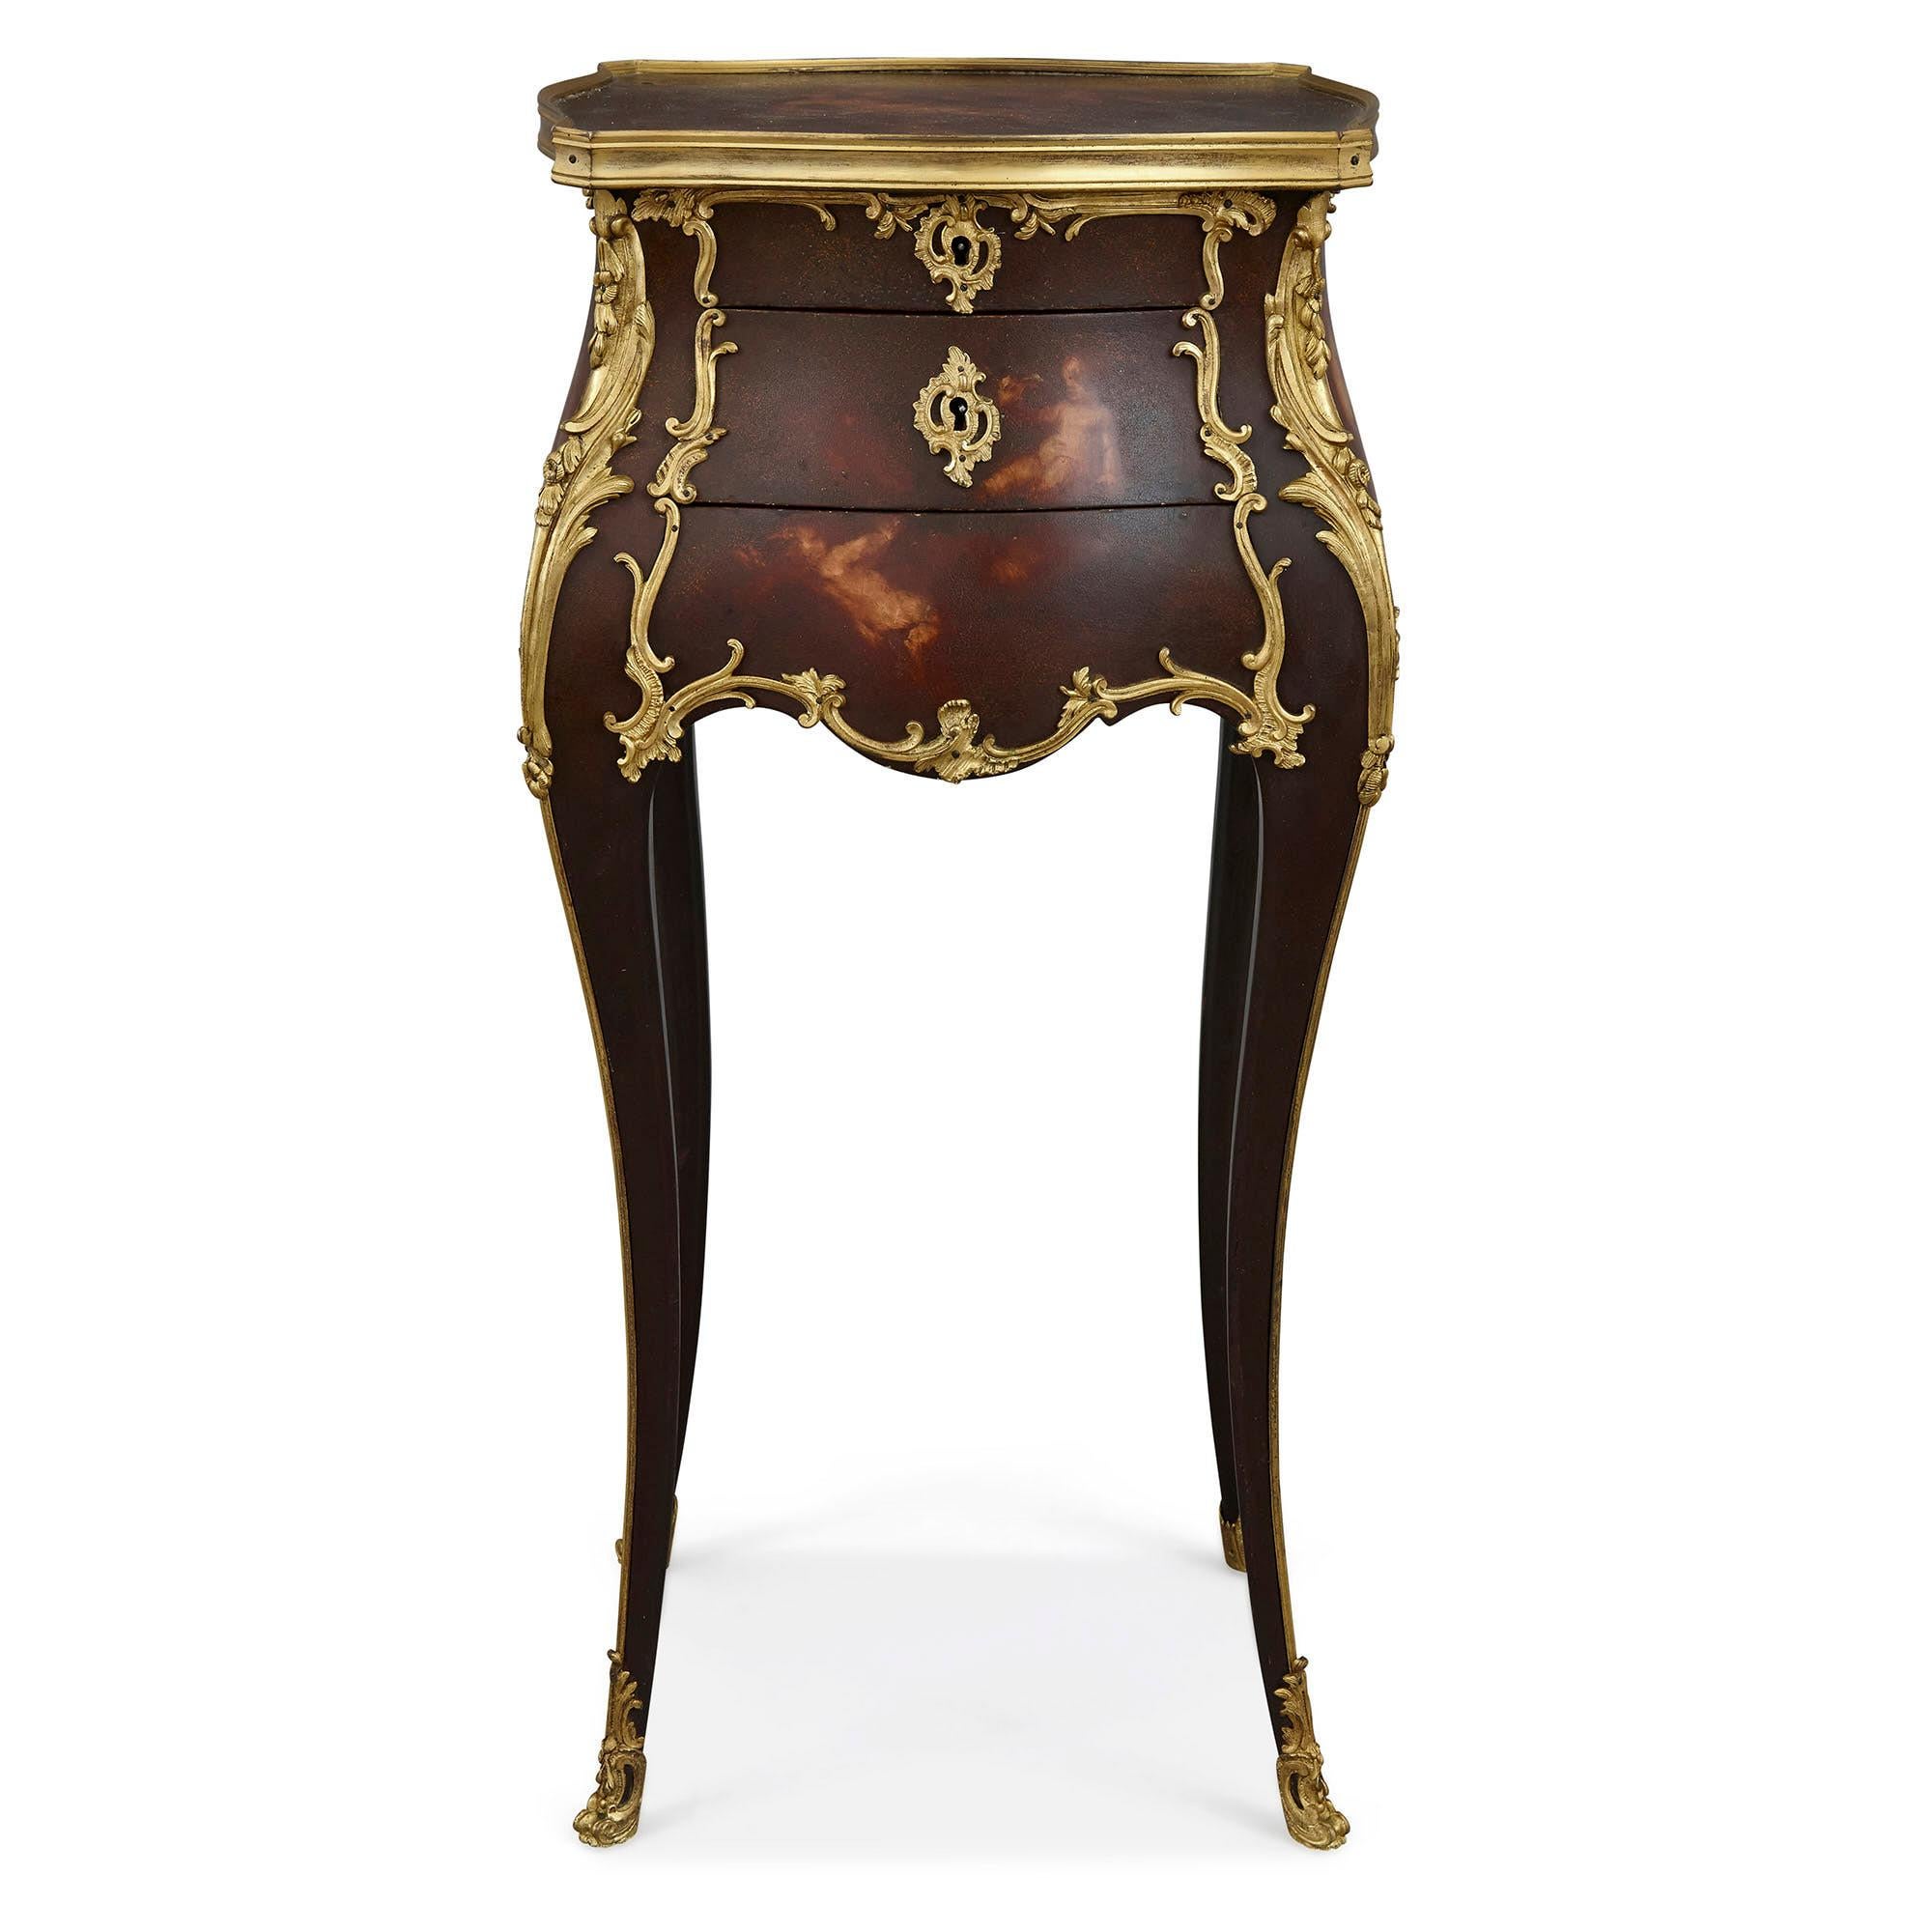 Rococo style side table with vernis Martin decoration and gilt bronze mounts
French, late 19th century
Measures: Height 75cm, width 36cm, depth 36cm

This wonderfully little side table also functional as a petit dressing table is a fine example